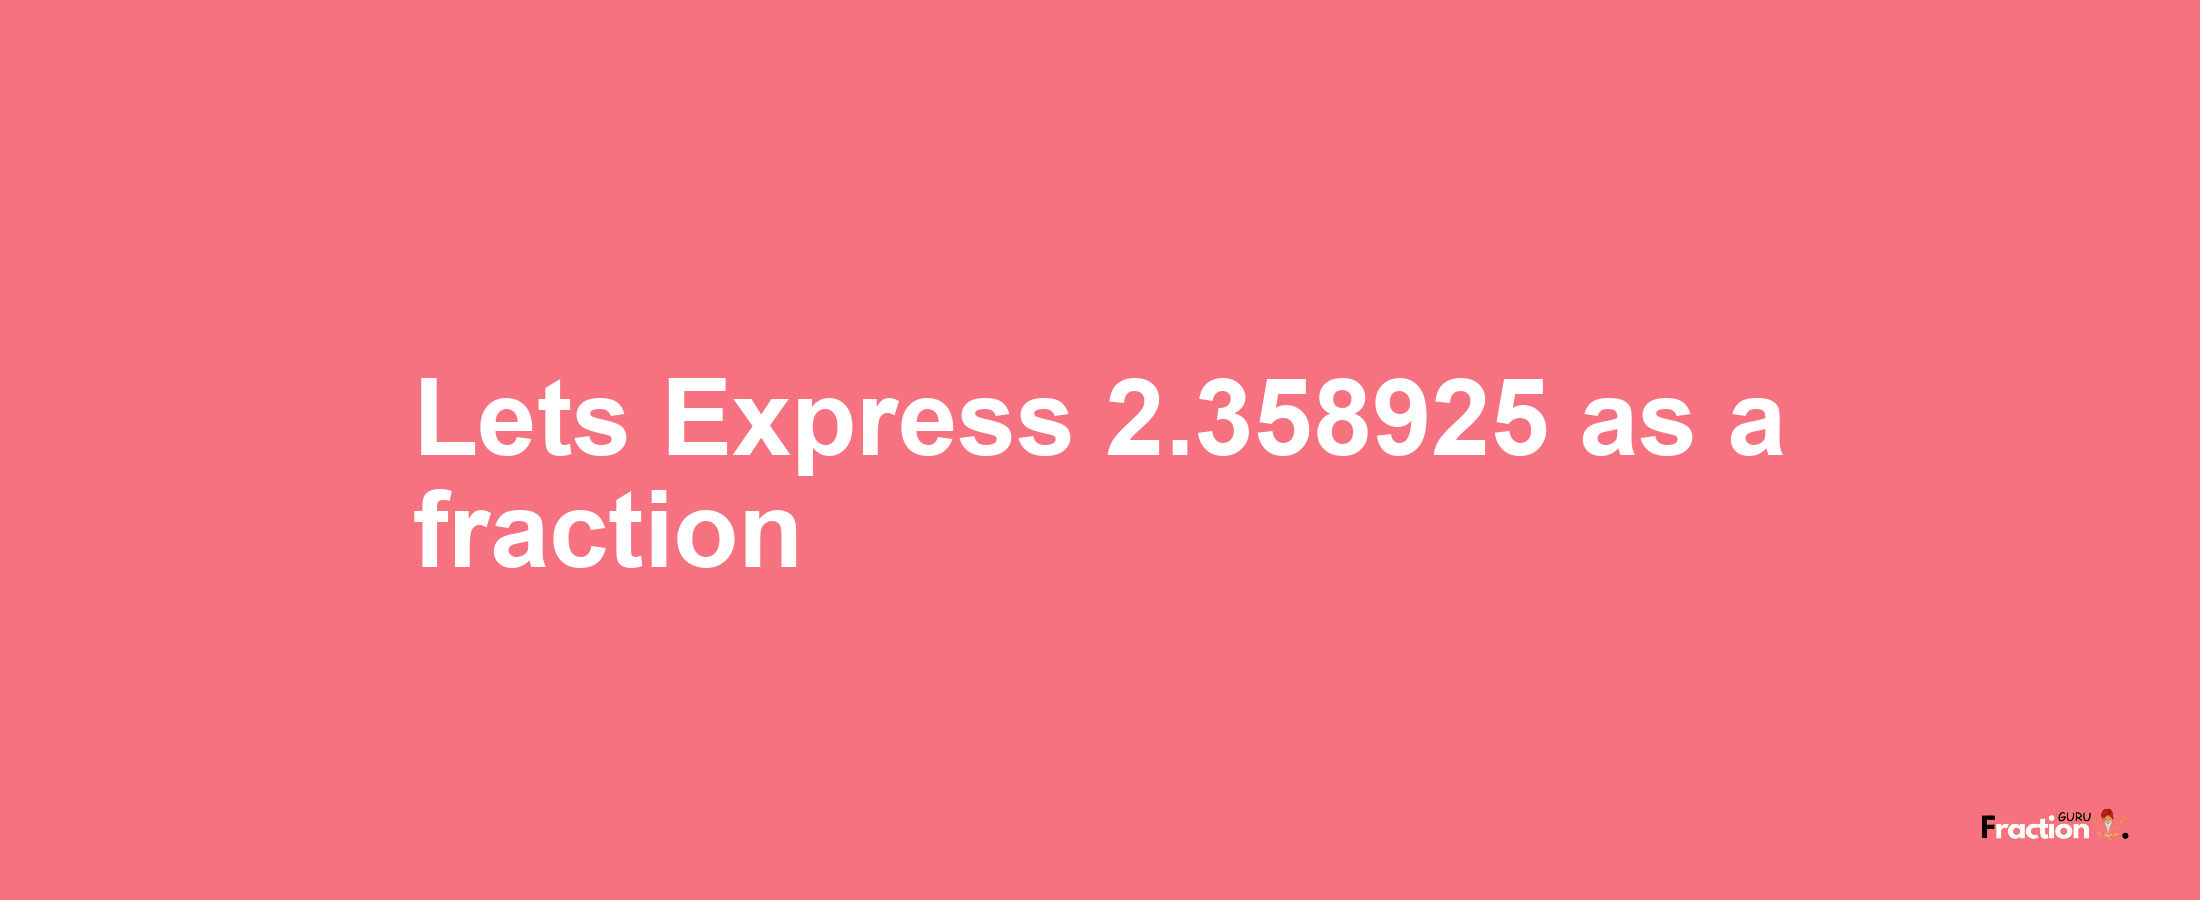 Lets Express 2.358925 as afraction